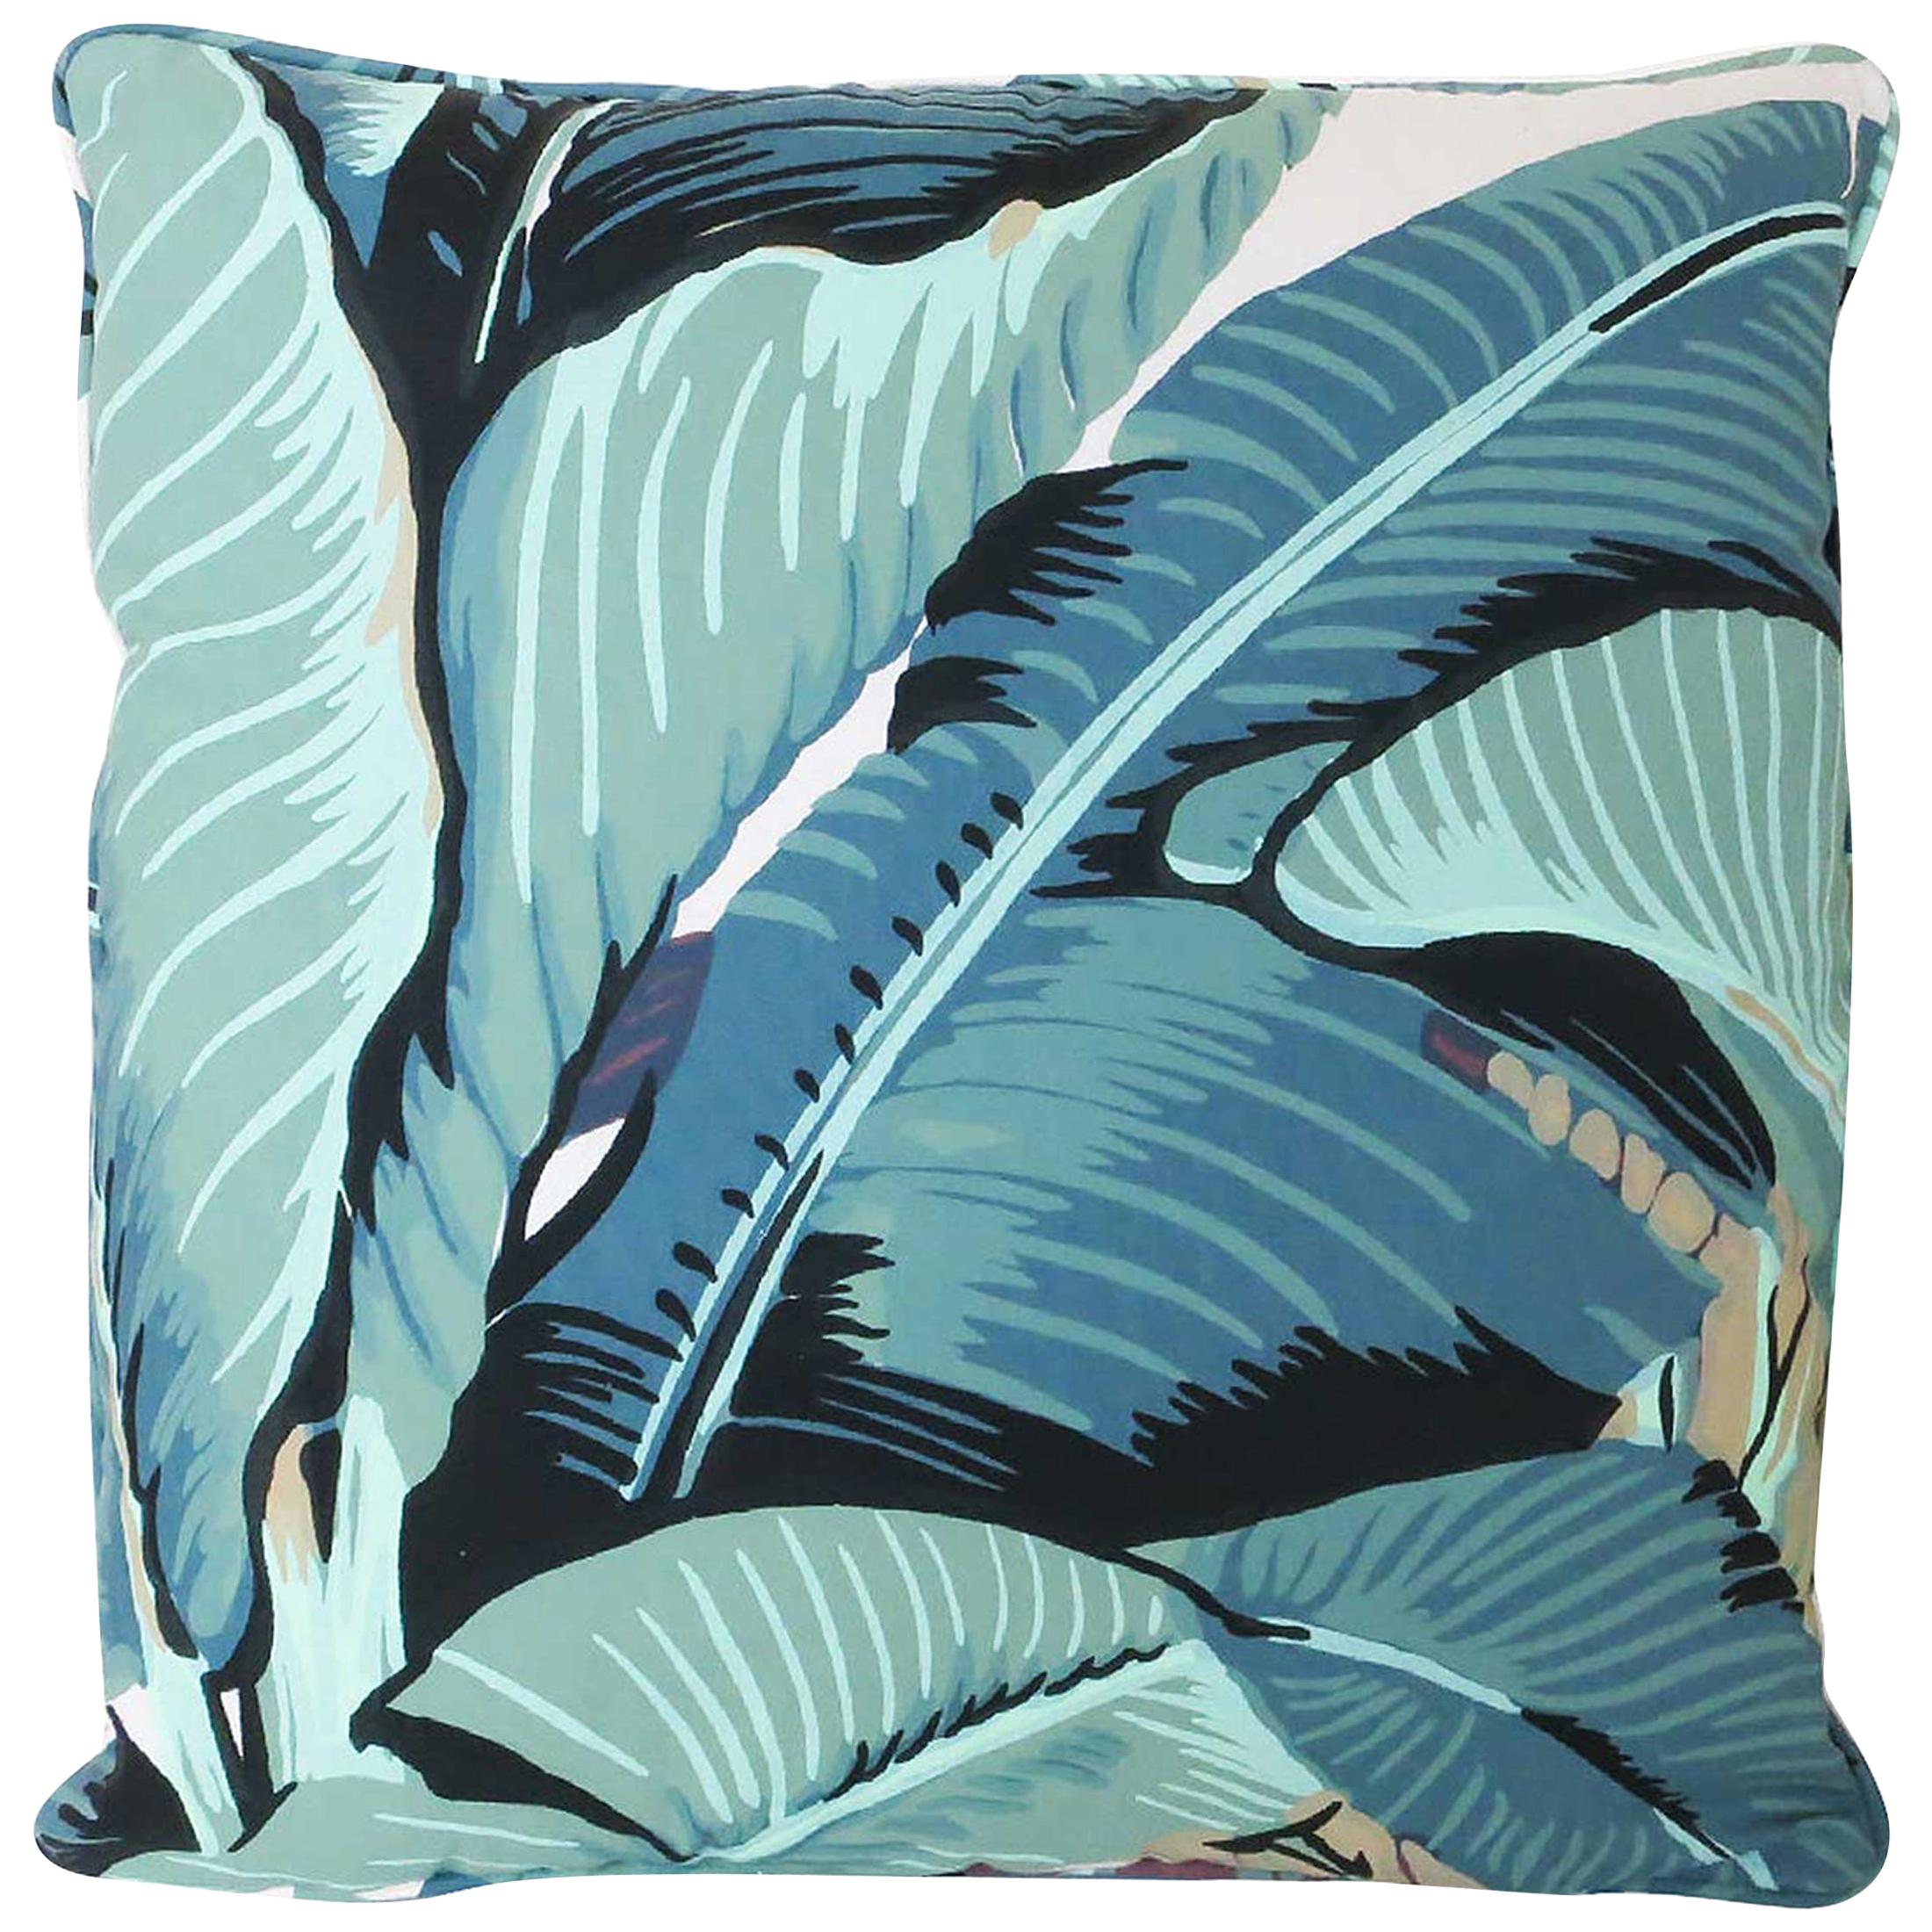 Beverly Hills Hotel Martinique Banana Leaf Throw Pillow